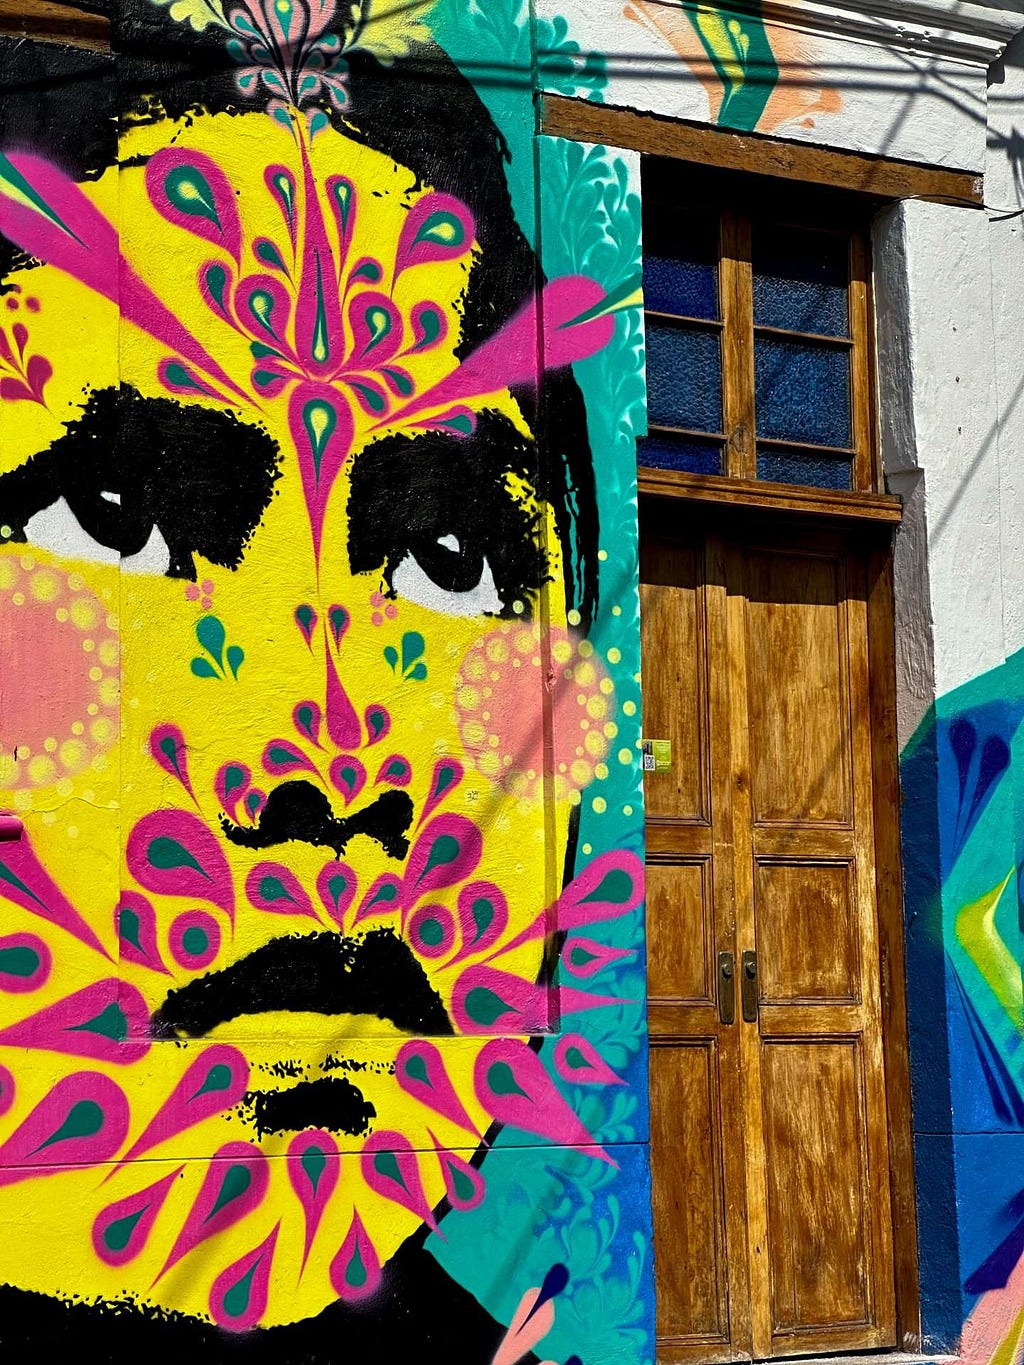 A vibrant mural of a face with intricate pink and yellow patterns covers a wall next to a wooden door, under a blue sky.